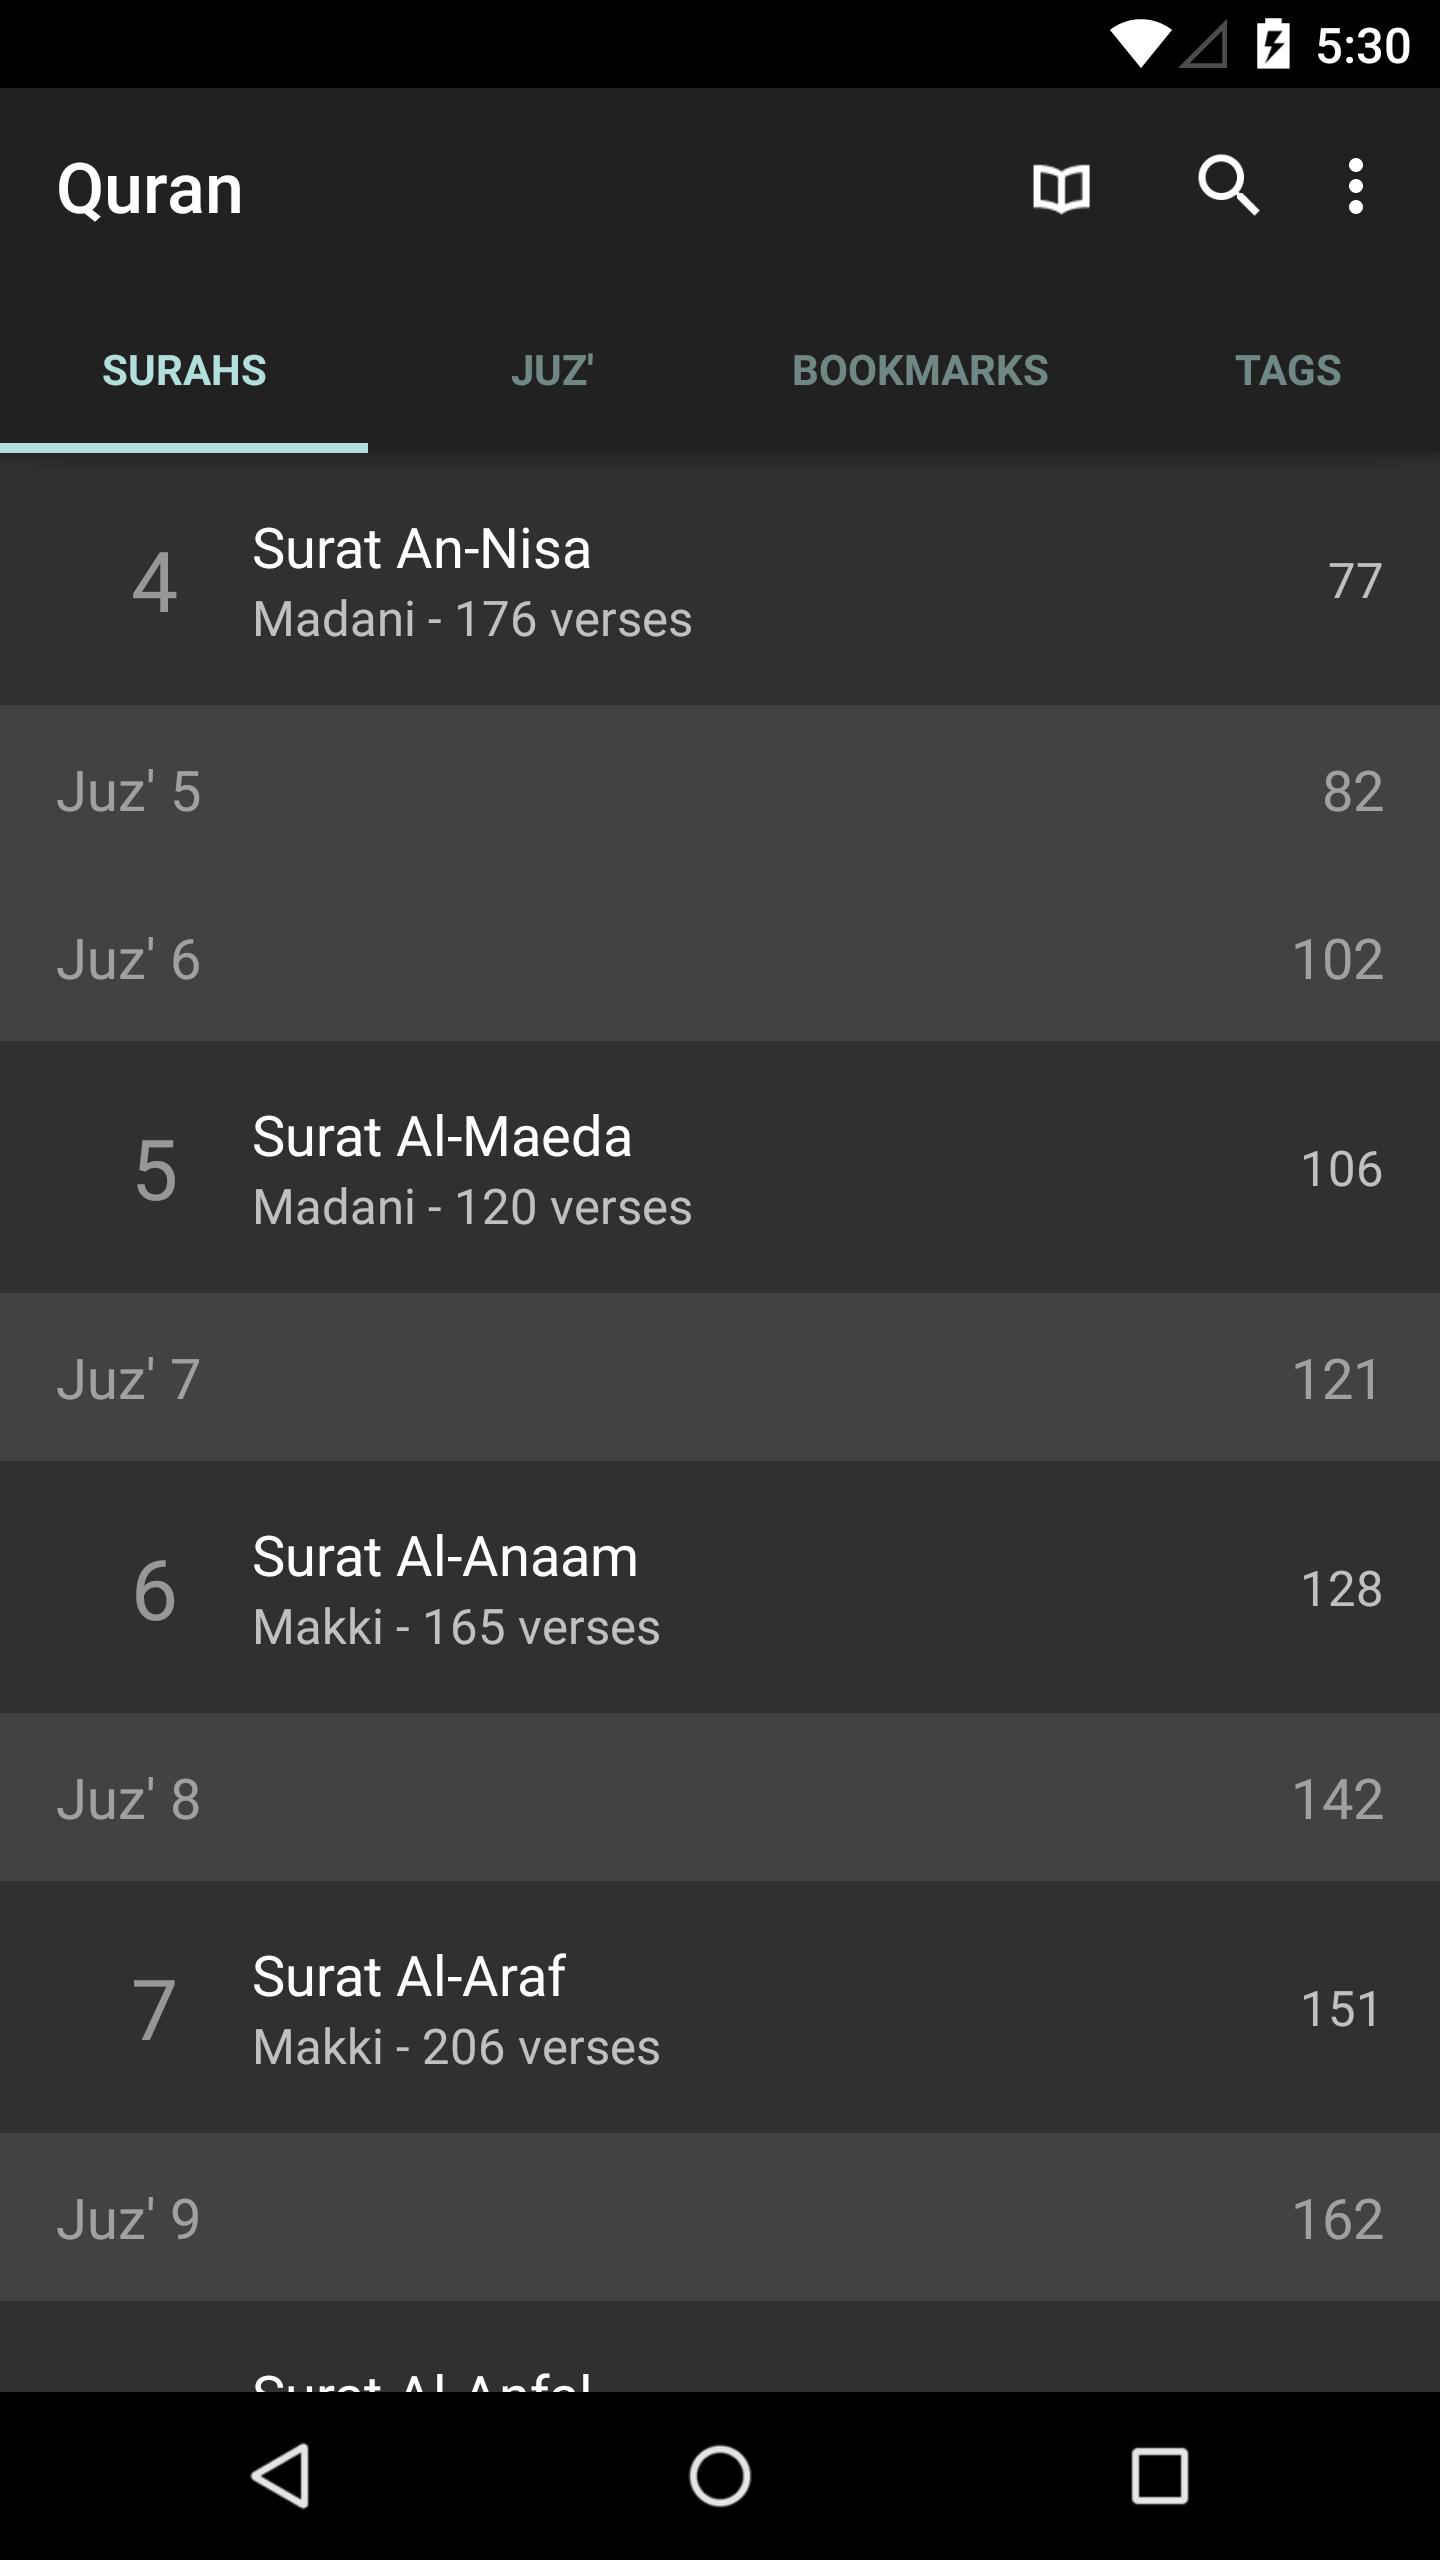 Quran for Android 3.0.2 Screenshot 1